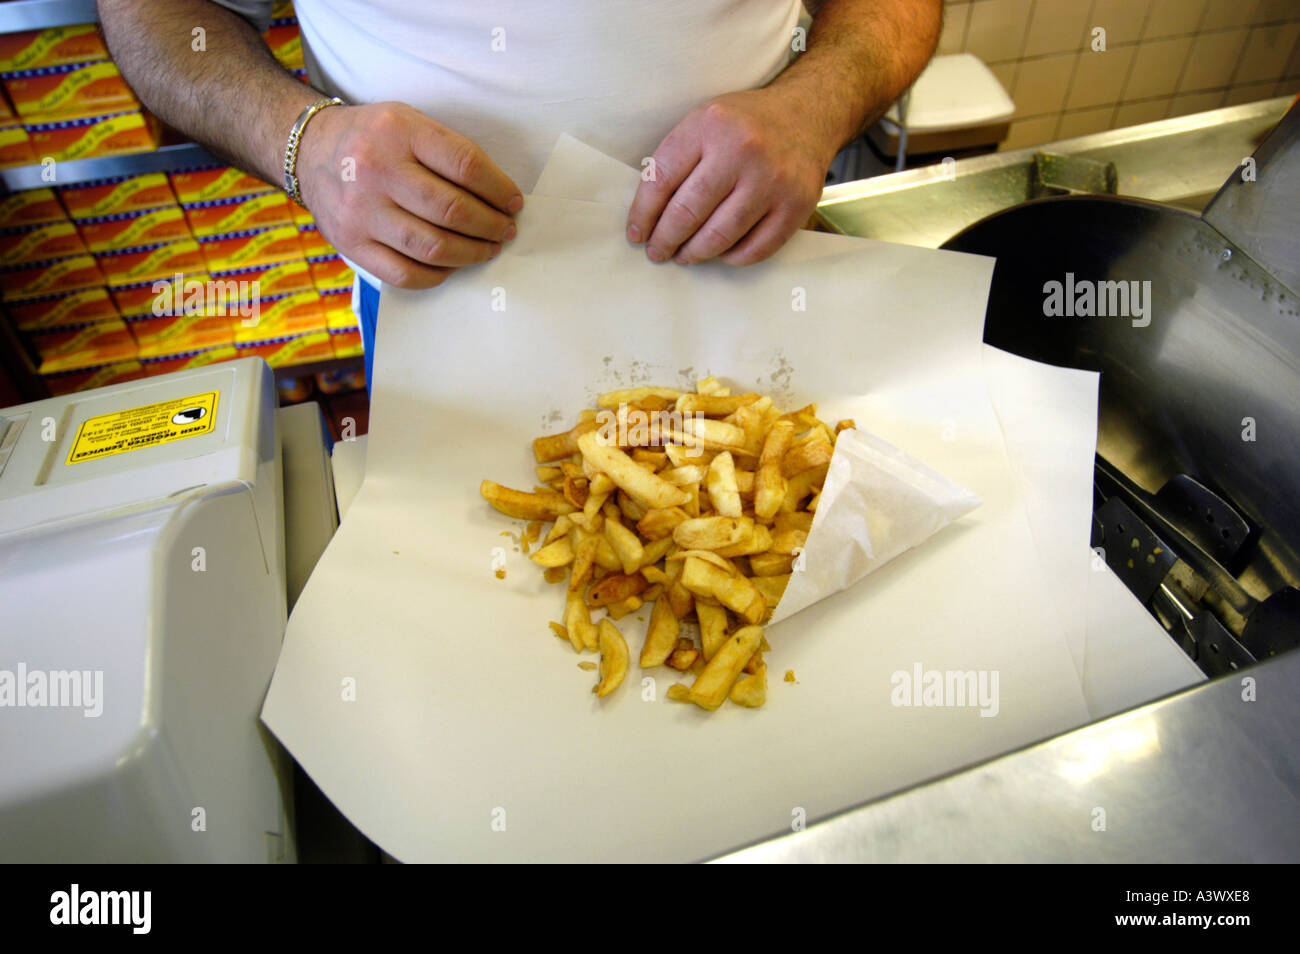 Portion of chips at fish and chip shop, England UK Stock Photo